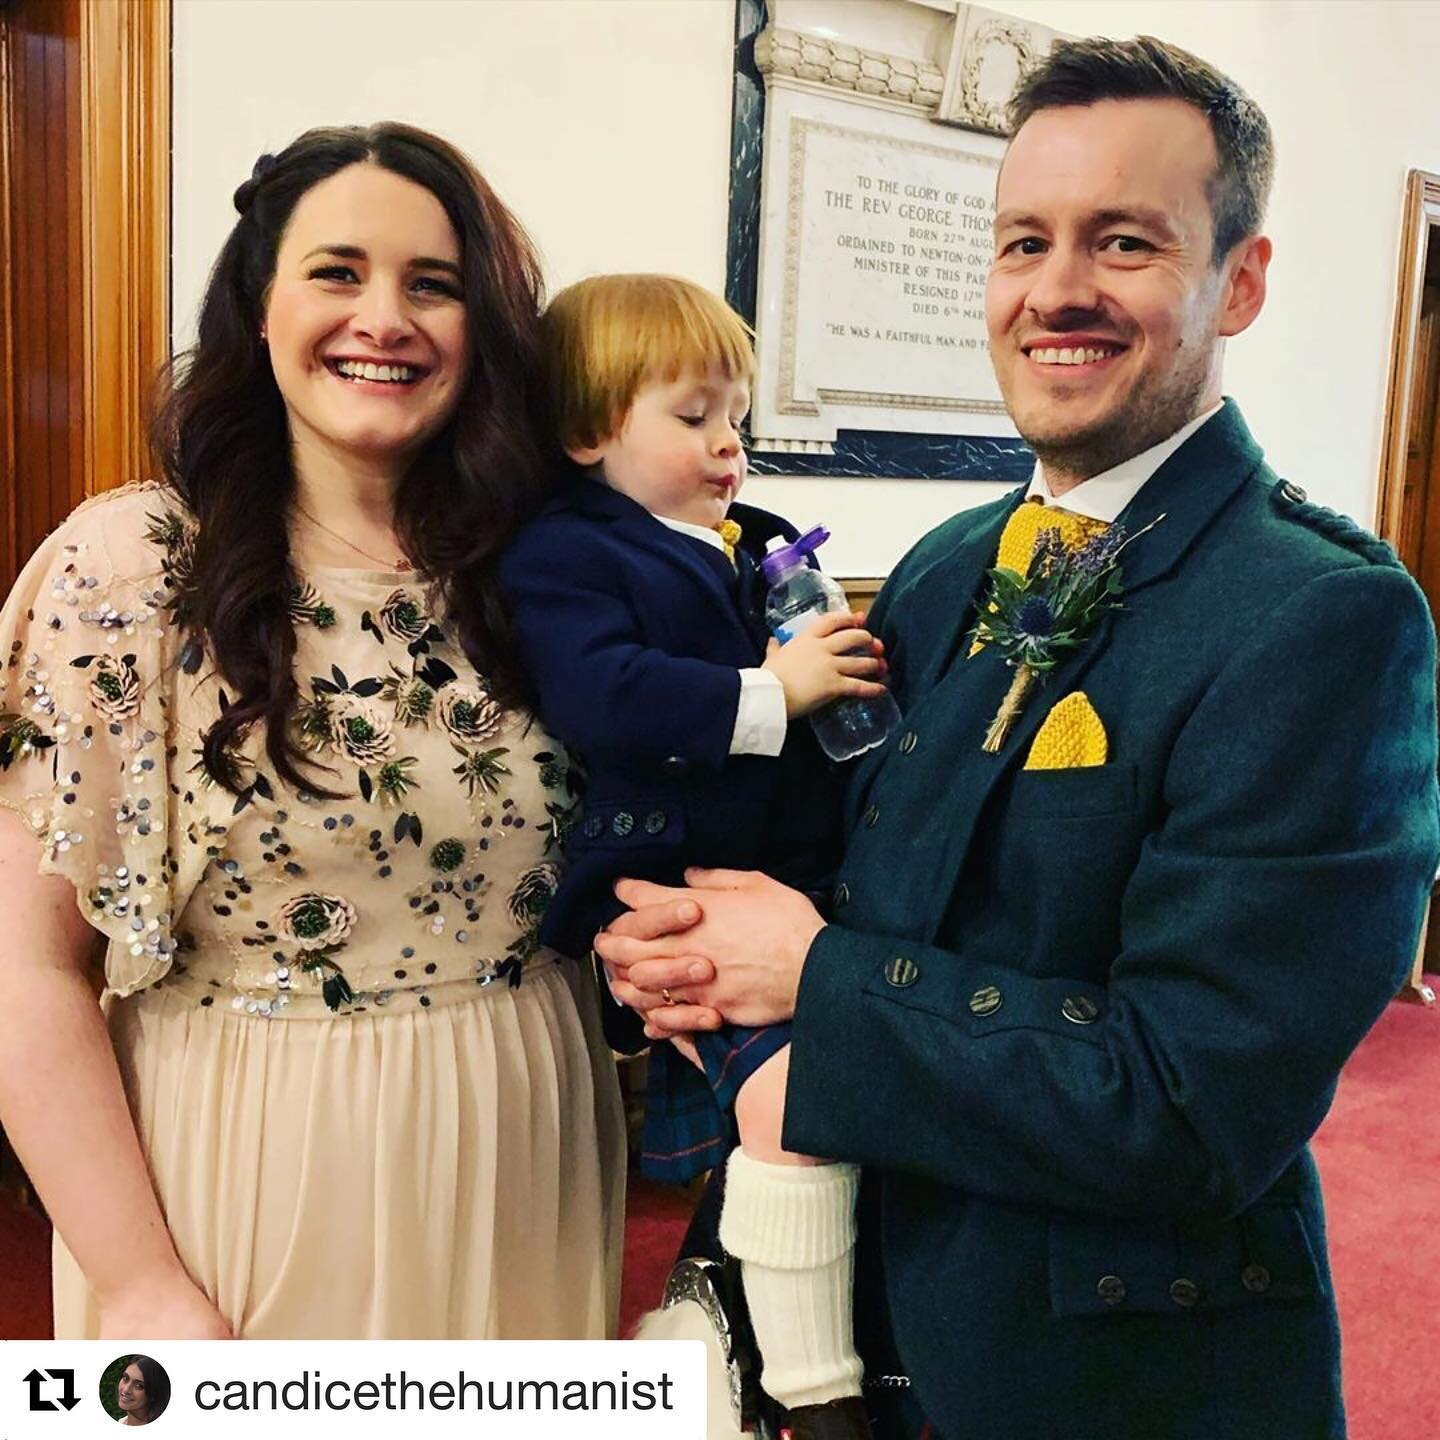 Congratulations folks 🥳🥰🙌#Repost @candicethehumanist with @get_repost
・・・
This lovely lot were all stars of the most joyful show yesterday.⁣
⁣
We cheered big time for a new Mr &amp; Mrs and a formally named Master. Suzie &amp; Kevin&rsquo;s weddin